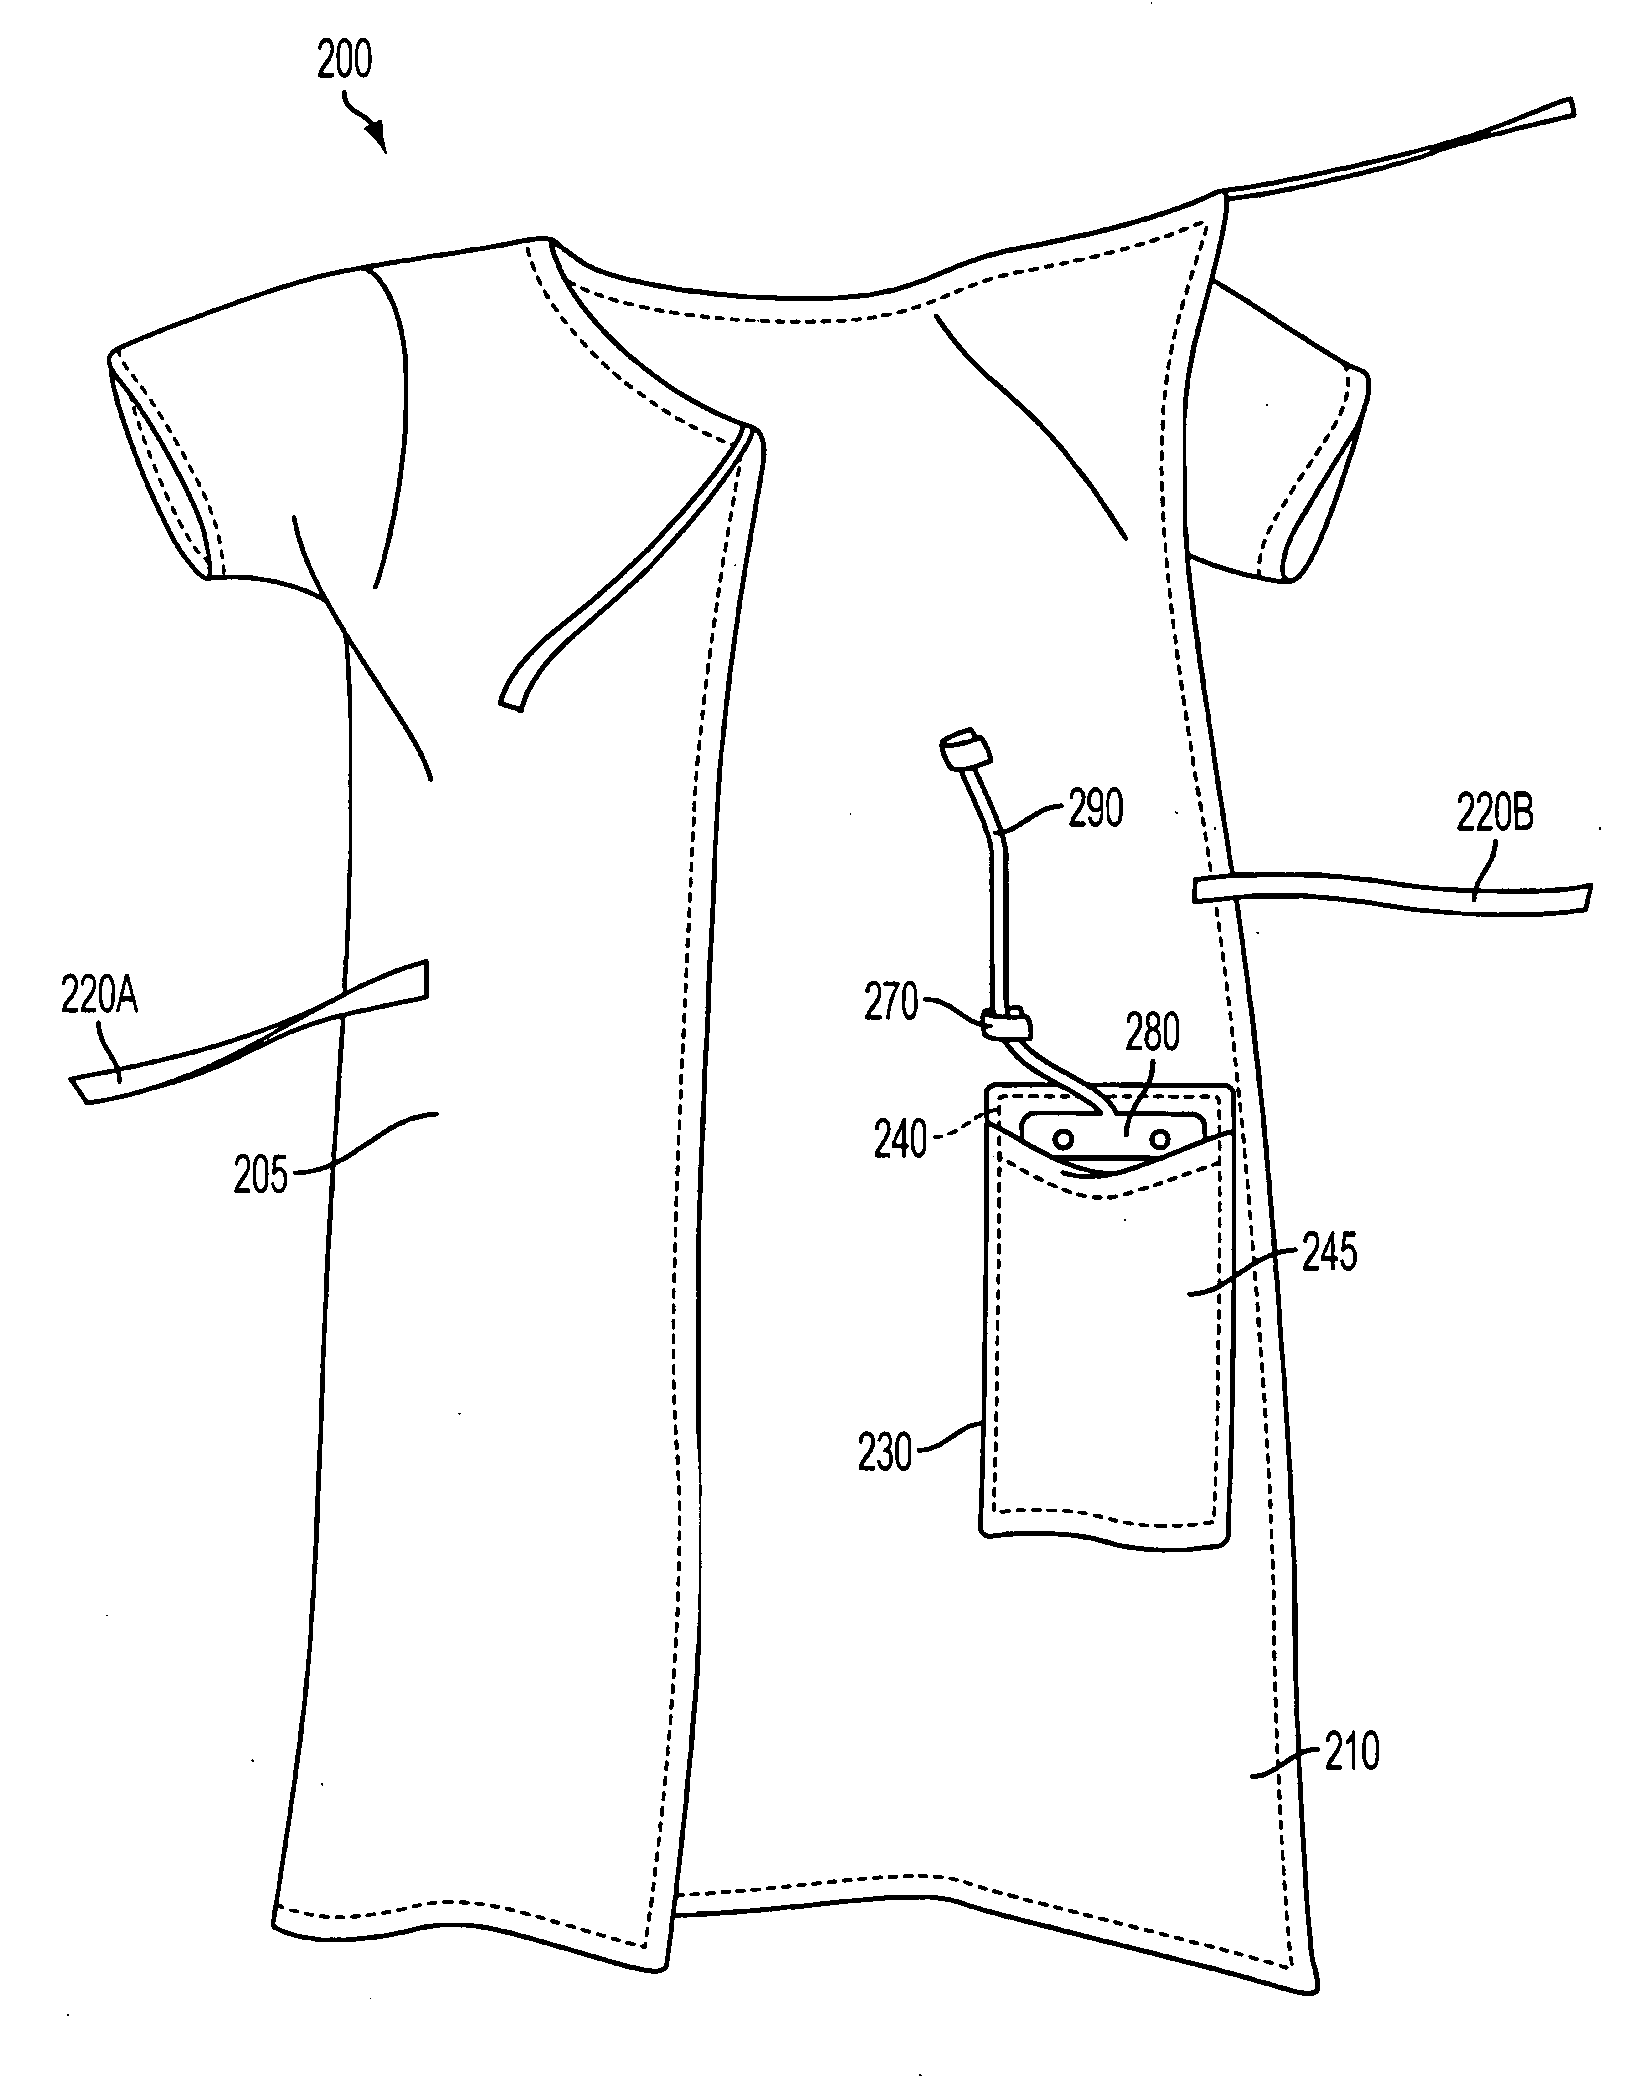 Attachable, constraint-free external drainage device support structure for use with standard hospital garments and patients' own clothing